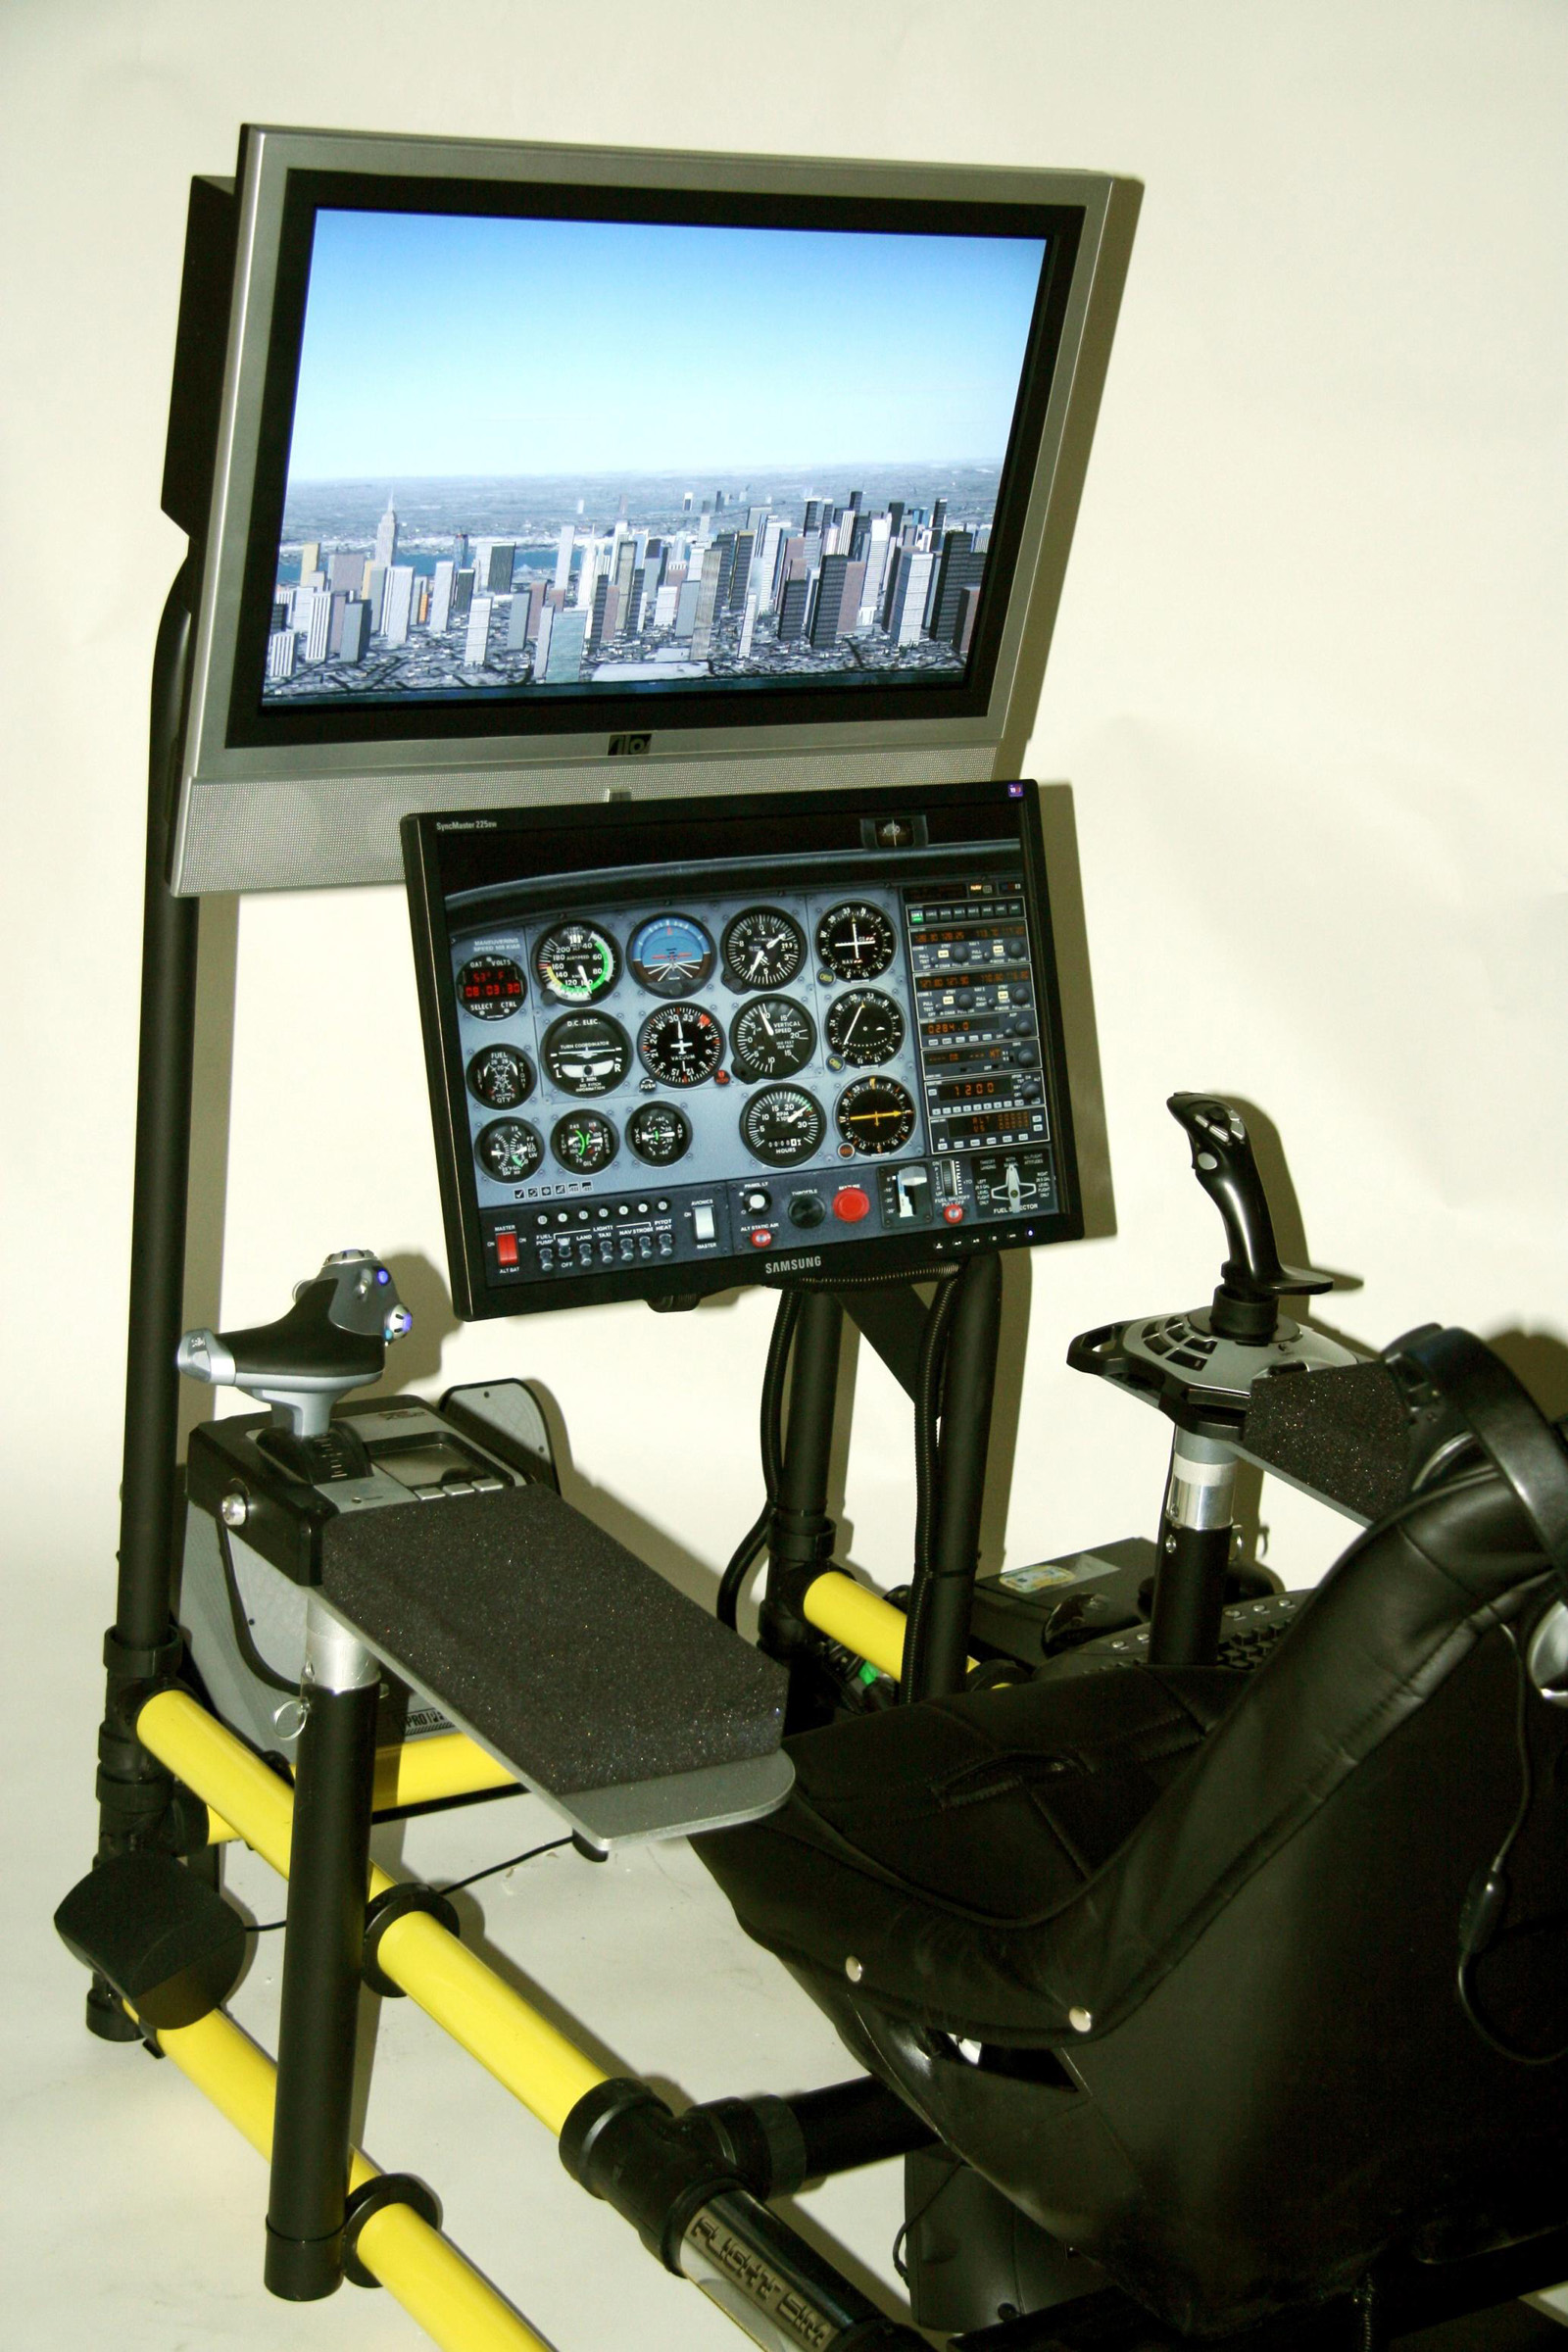 HotSeat Delivers “In-the-Cockpit” Experience